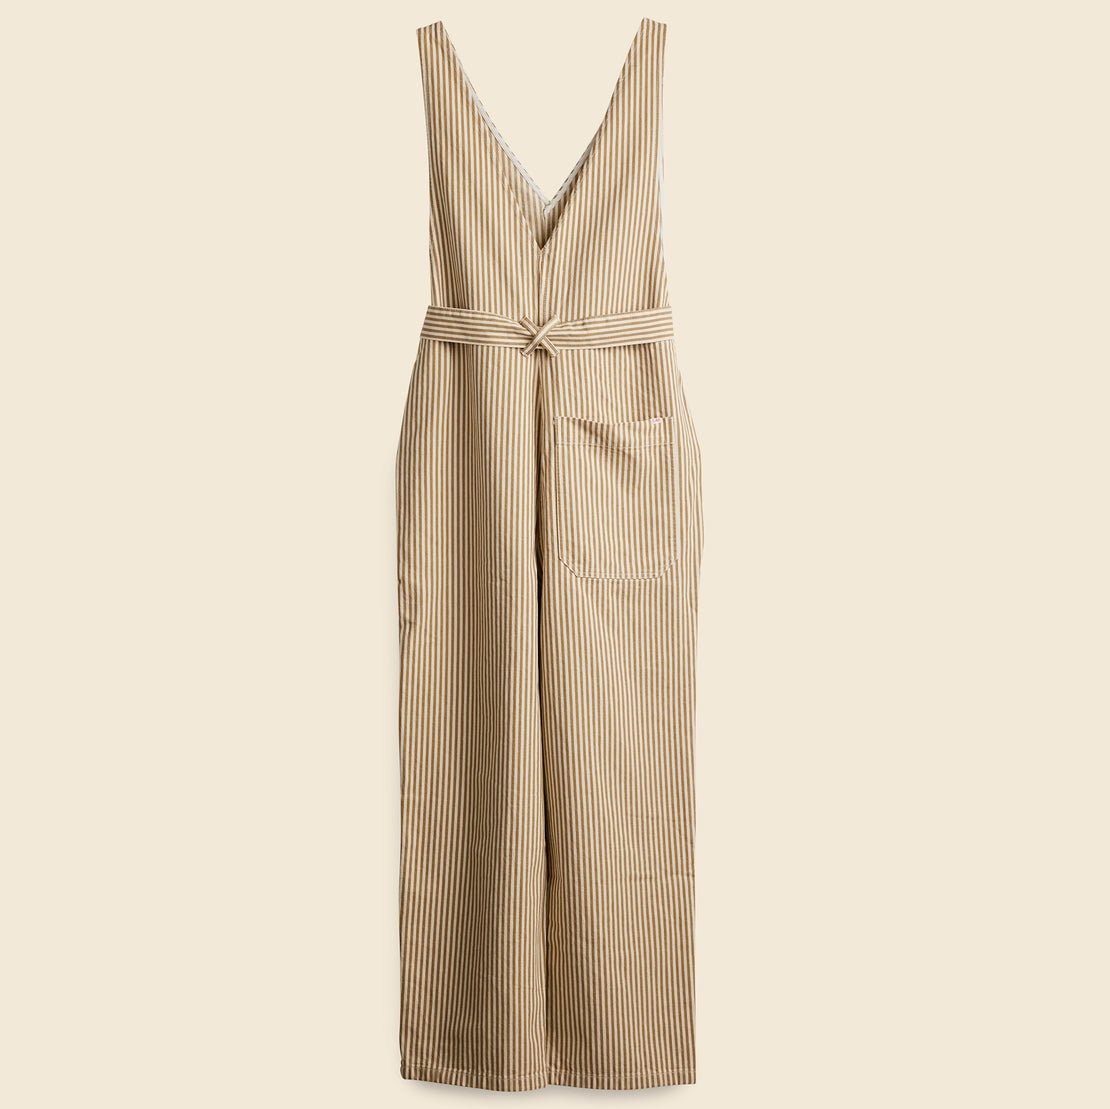 Ollie Overall - Khaki/Ivory Railroad Stripe - Alex Mill - STAG Provisions - W - Onepiece - Overalls